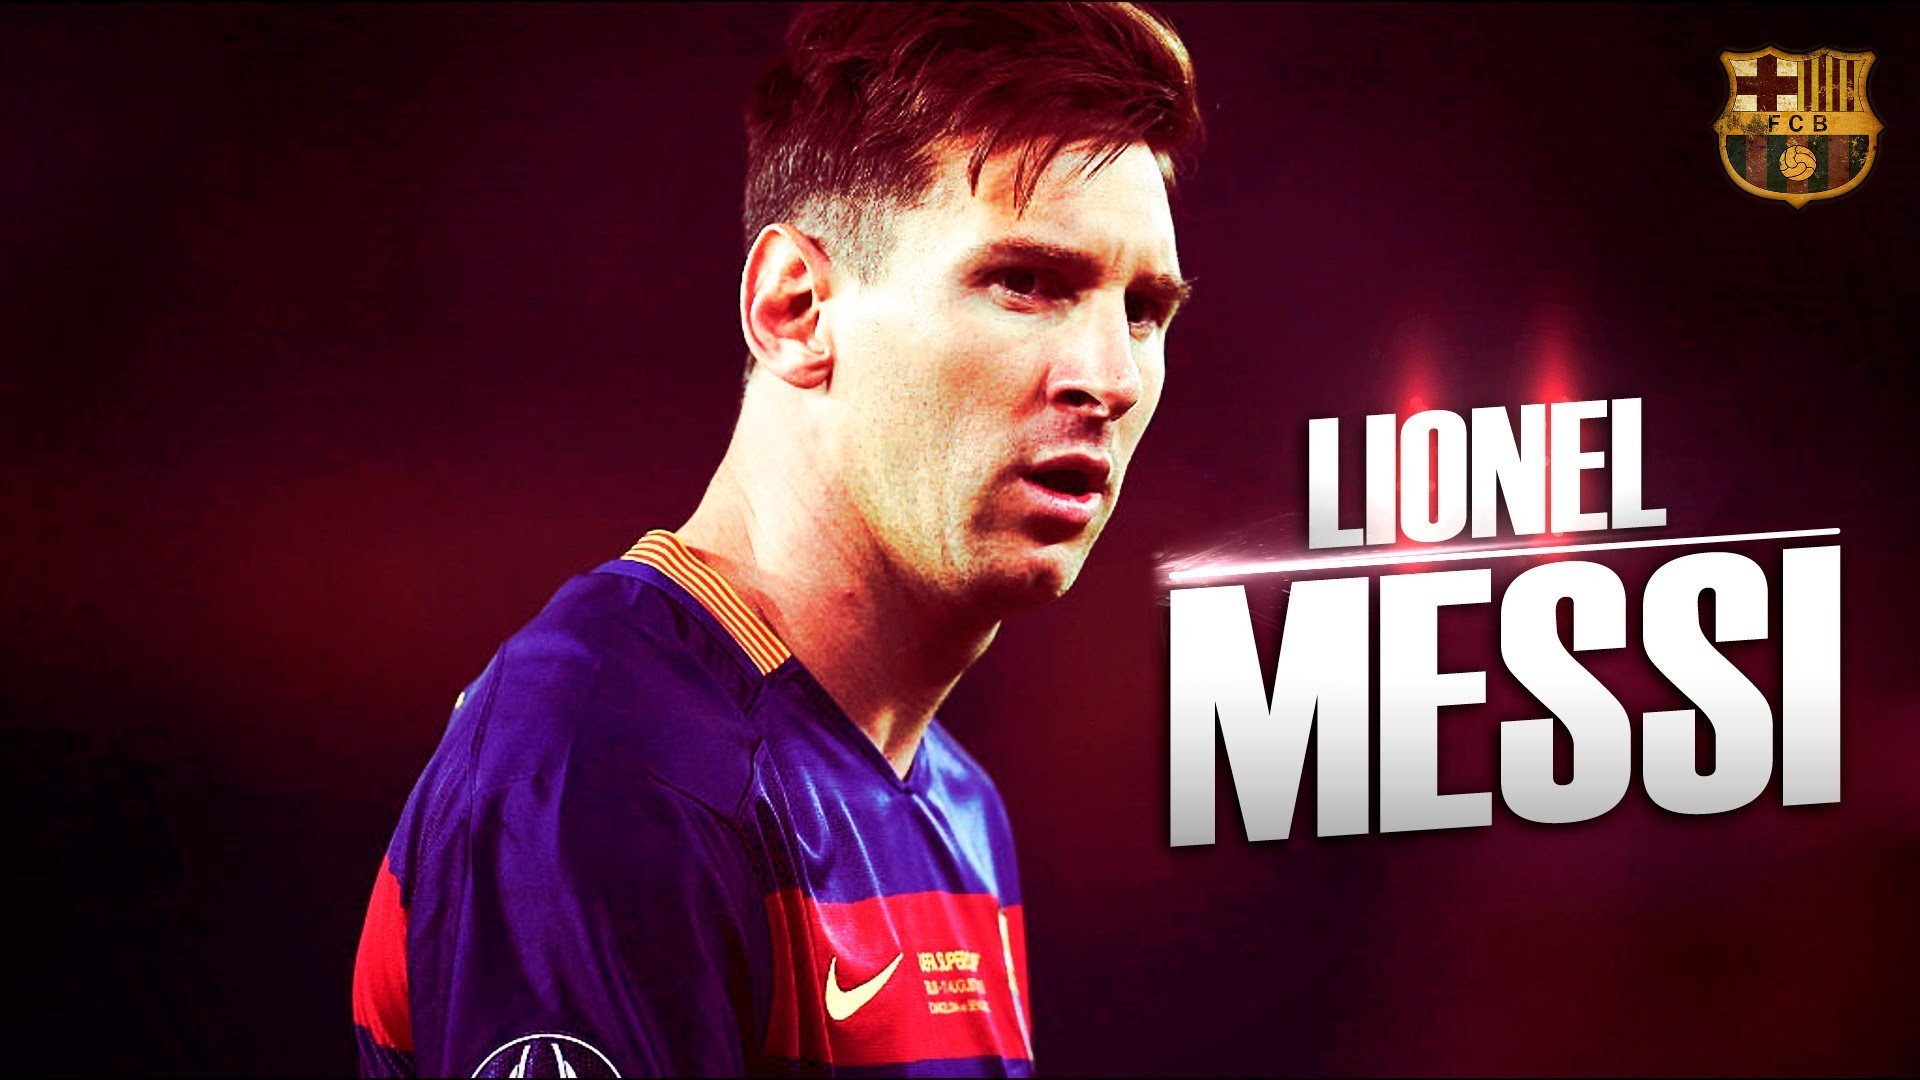 Lionel Messi For PC Wallpaper With Resolution 1920X1080 pixel. You can make this wallpaper for your Mac or Windows Desktop Background, iPhone, Android or Tablet and another Smartphone device for free